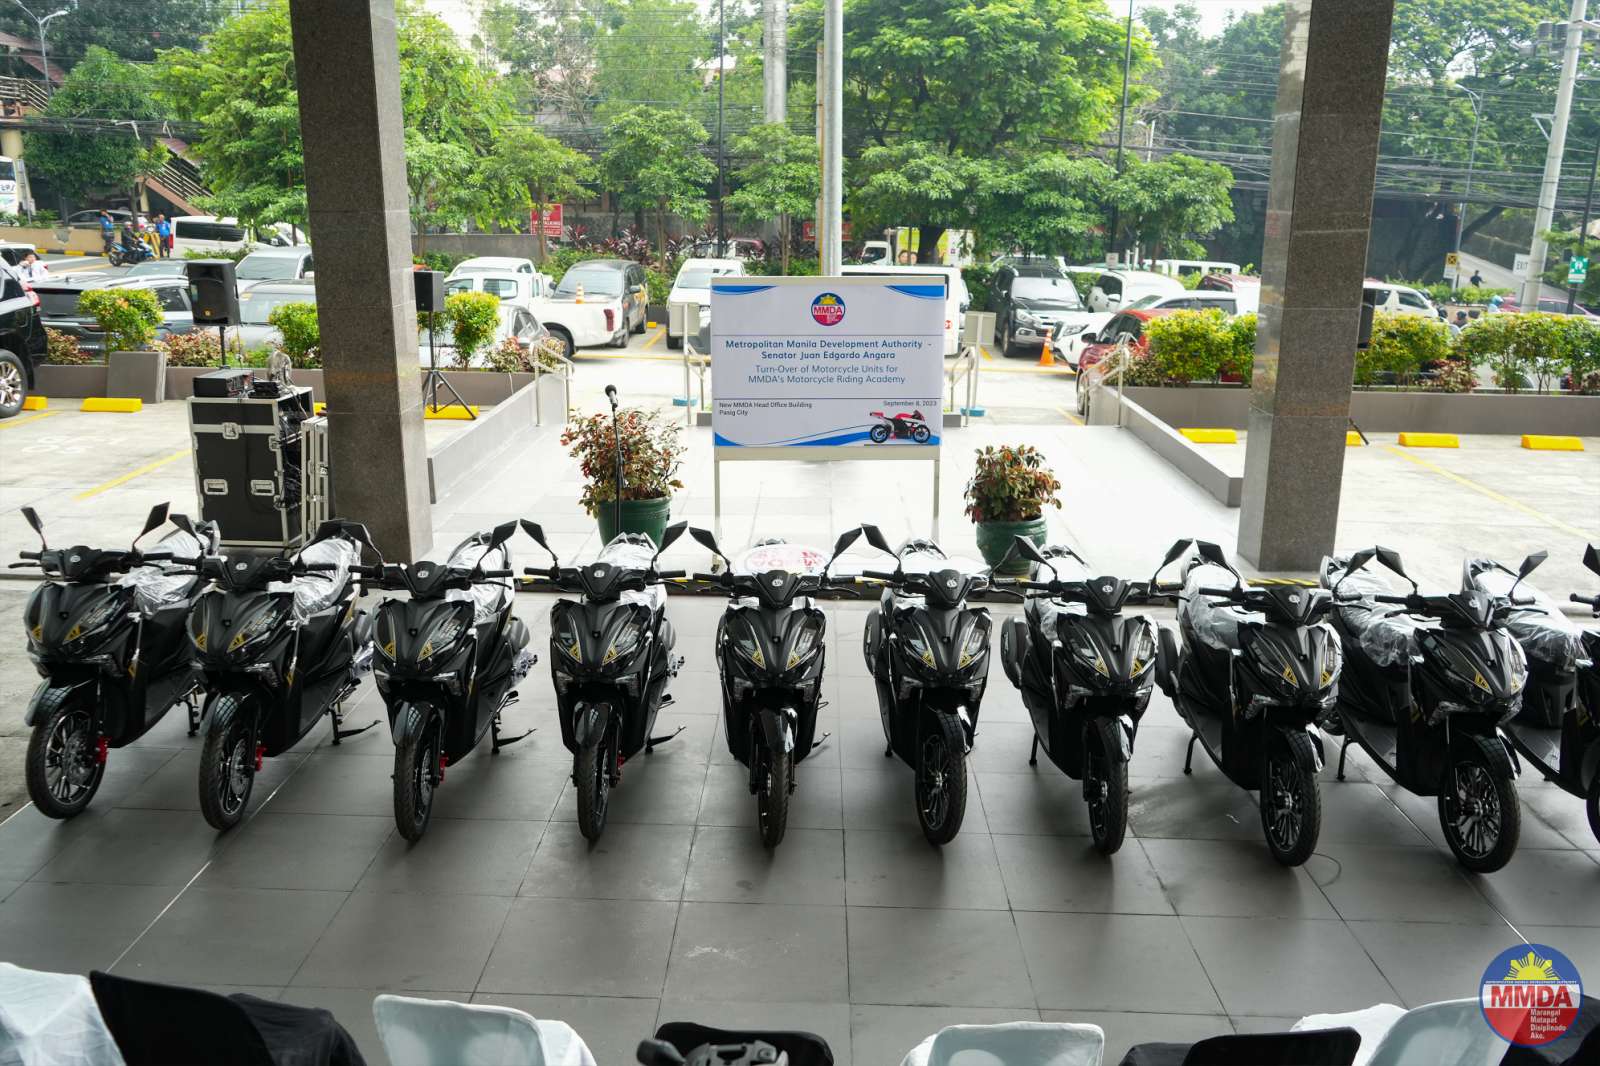 MMDA Motorcycle Riding Academy - open to all motorists